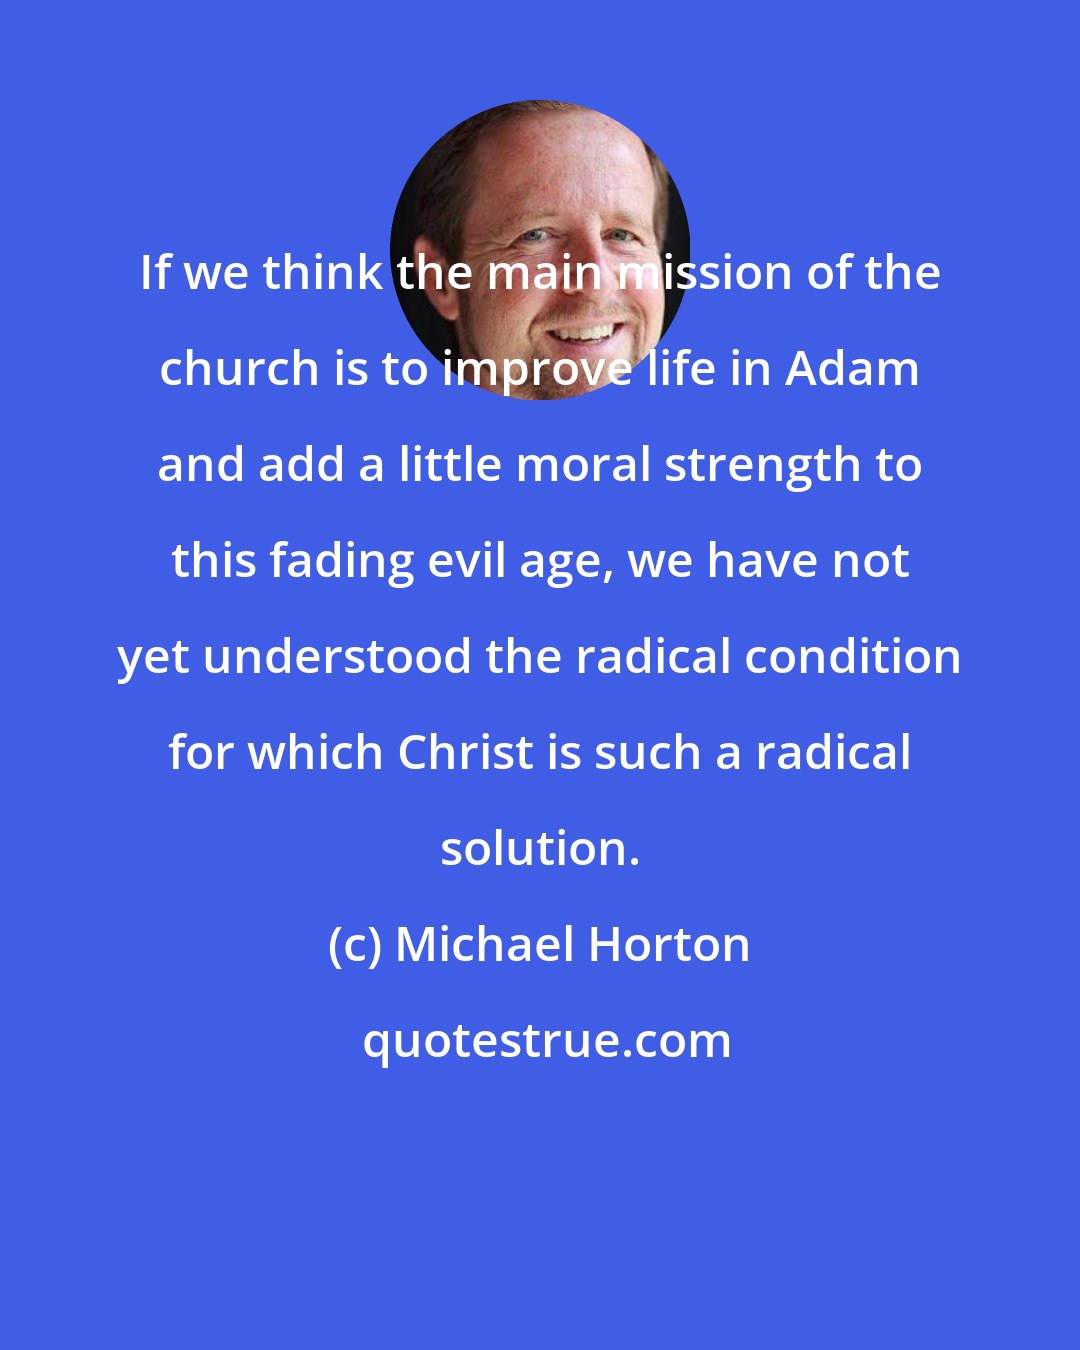 Michael Horton: If we think the main mission of the church is to improve life in Adam and add a little moral strength to this fading evil age, we have not yet understood the radical condition for which Christ is such a radical solution.